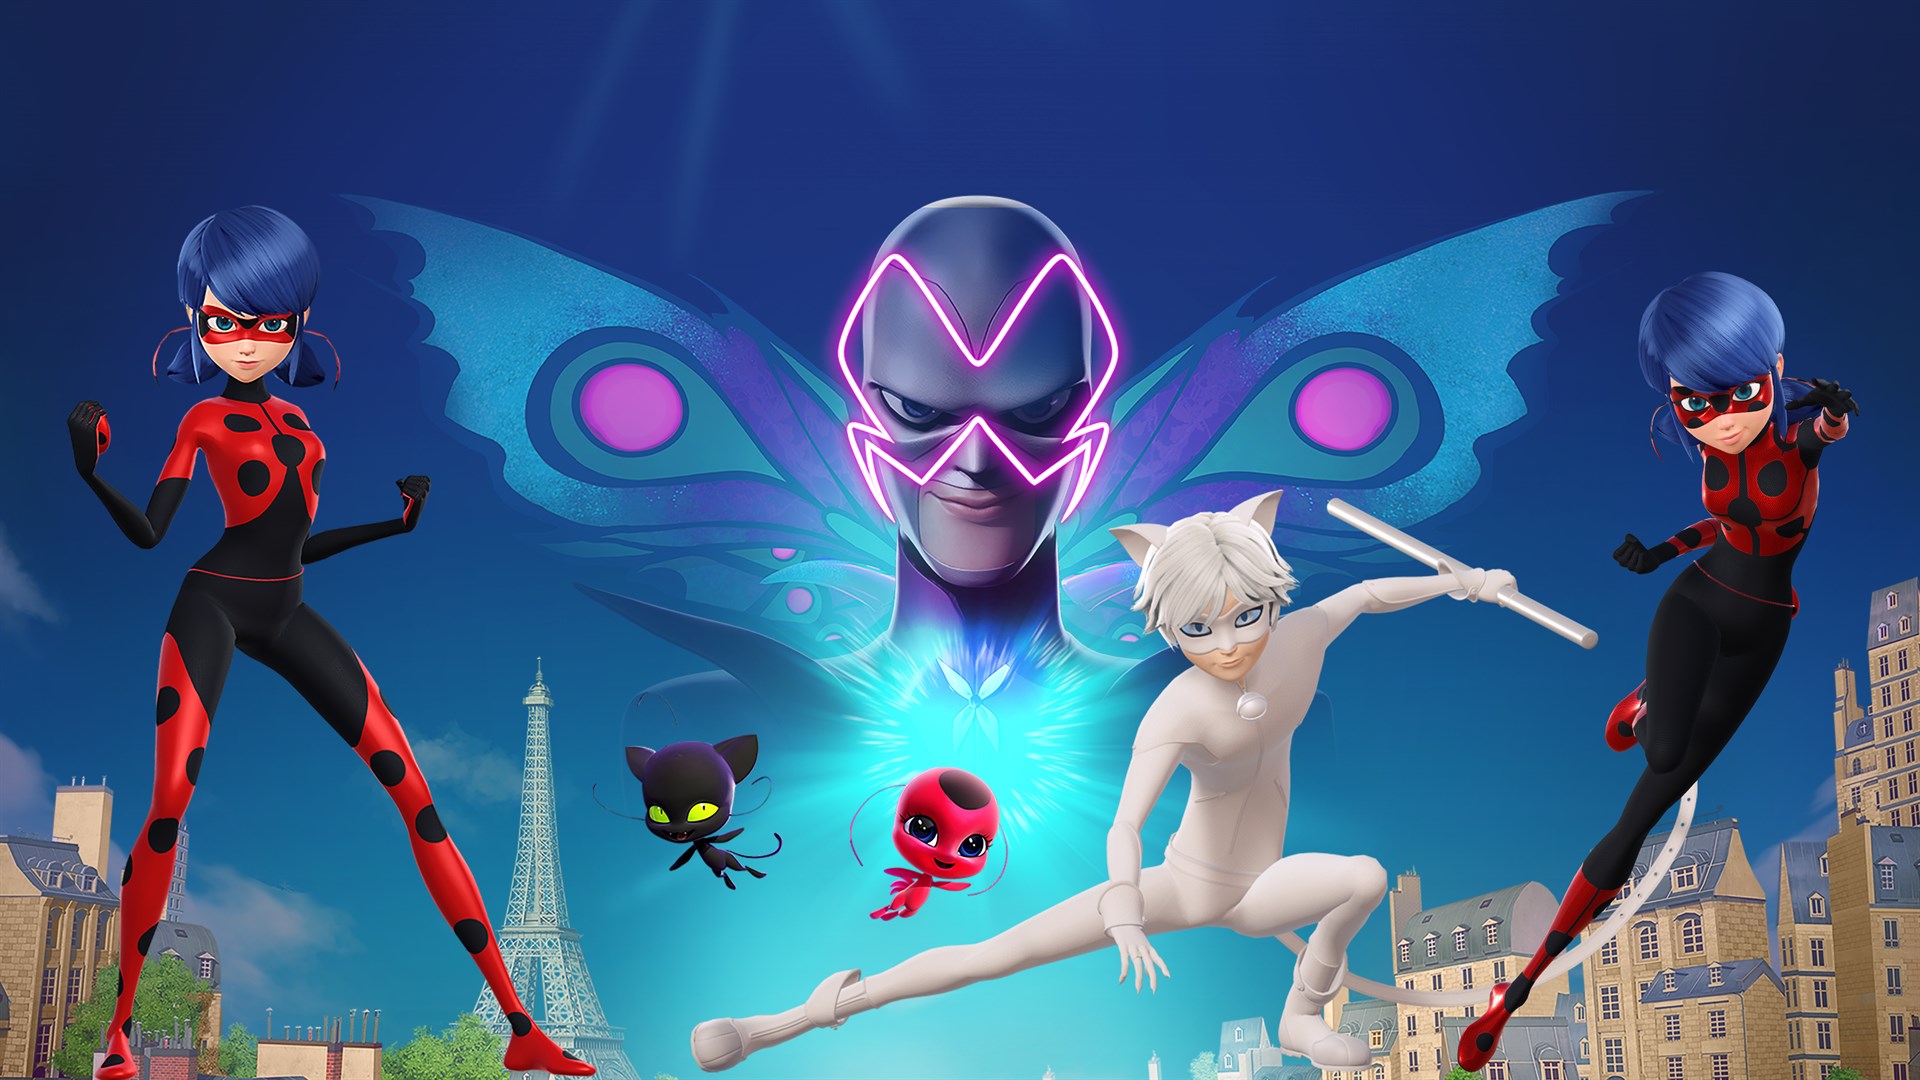 miraculous-rise-of-the-sphinx-cat-noir-and-ladybug-costume-pack